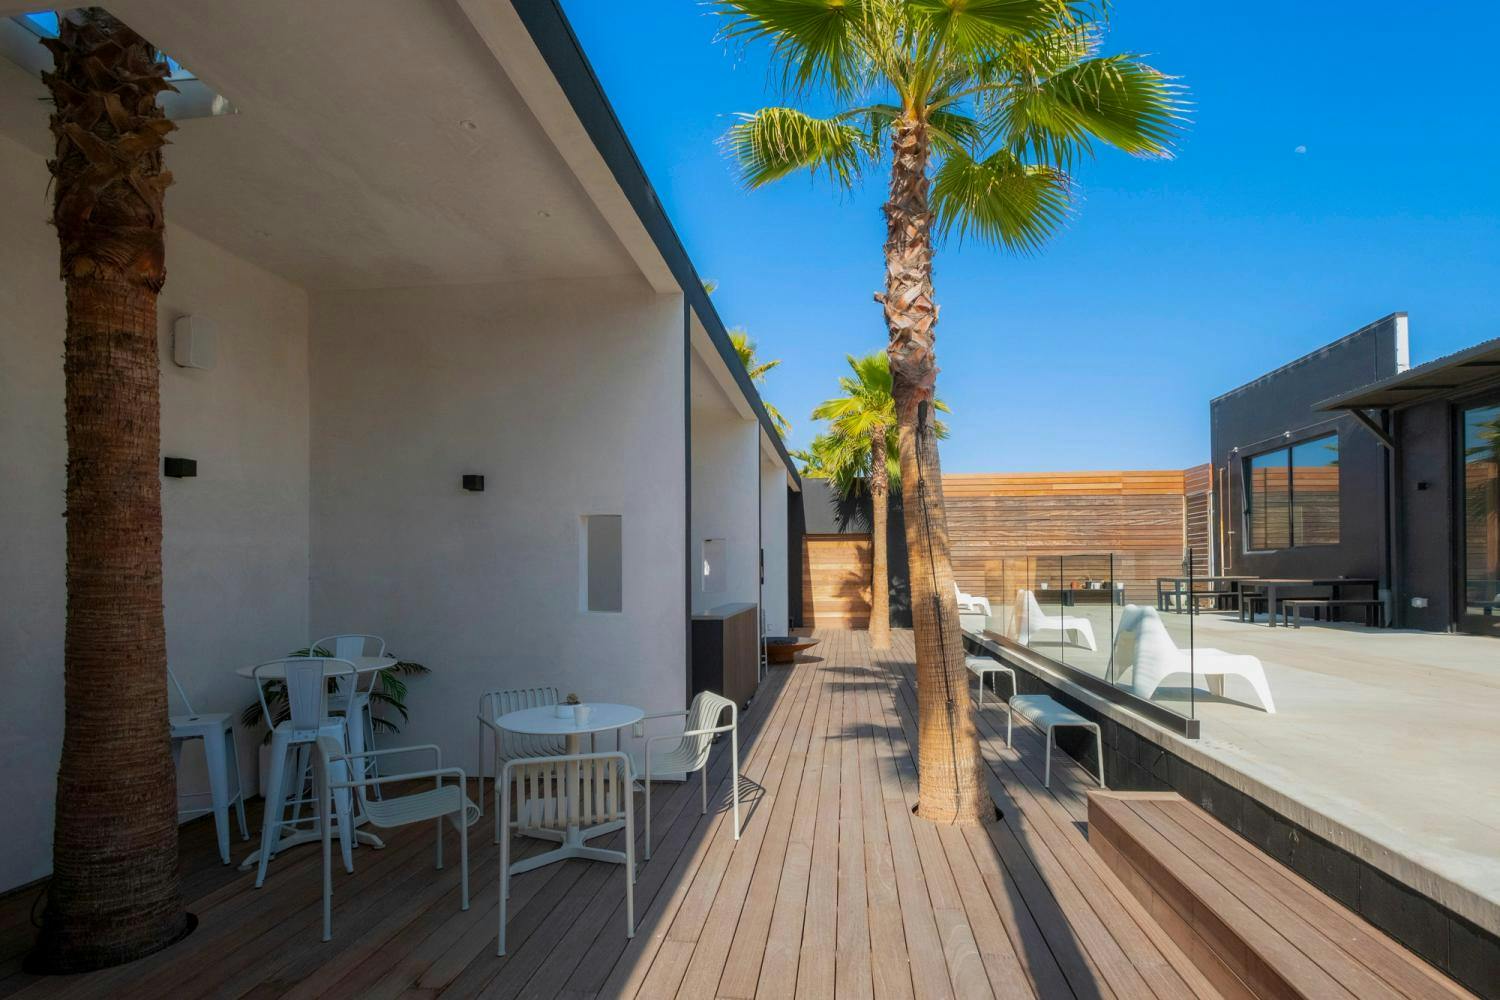 A chic and tranquil outdoor patio with wooden decking, palm trees, and minimalist furniture, perfect for relaxation.